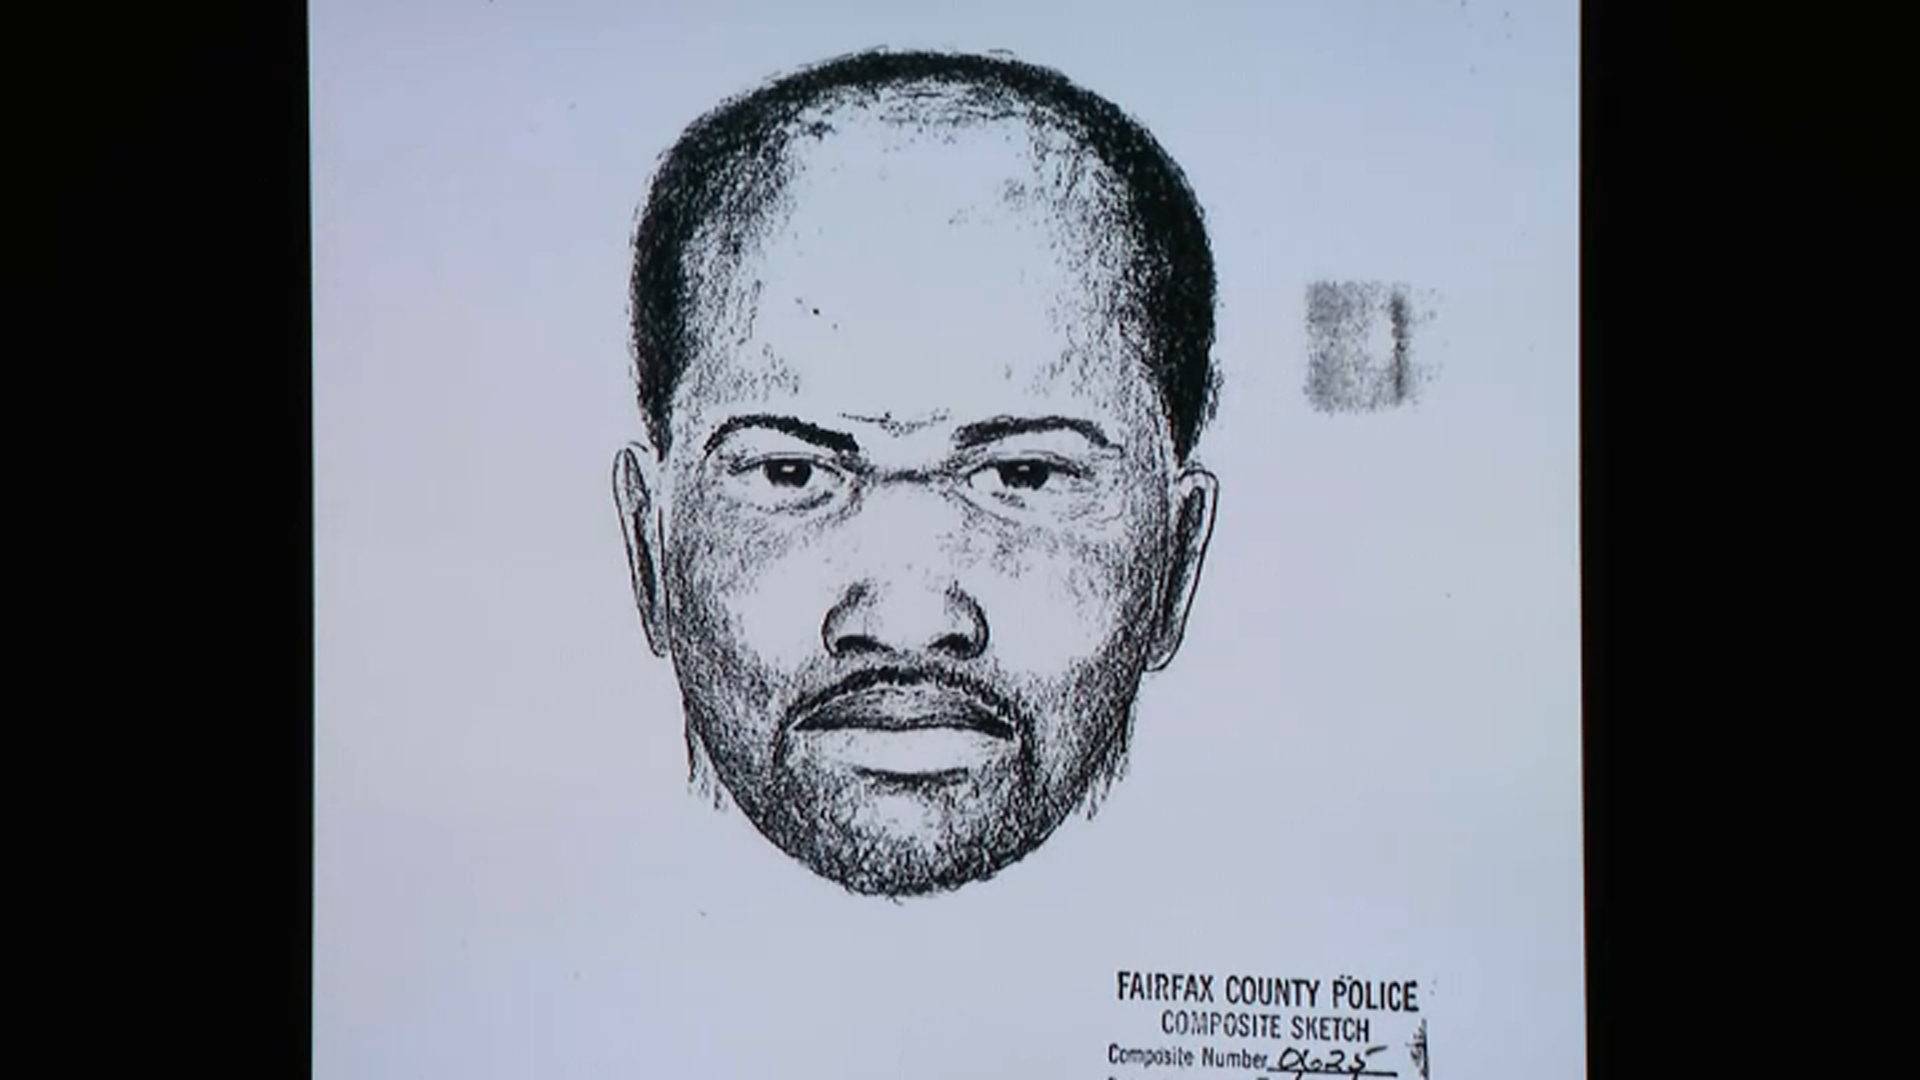 Fingerprints, DNA Link Brothers to 1988 Rape in Fairfax County: Police